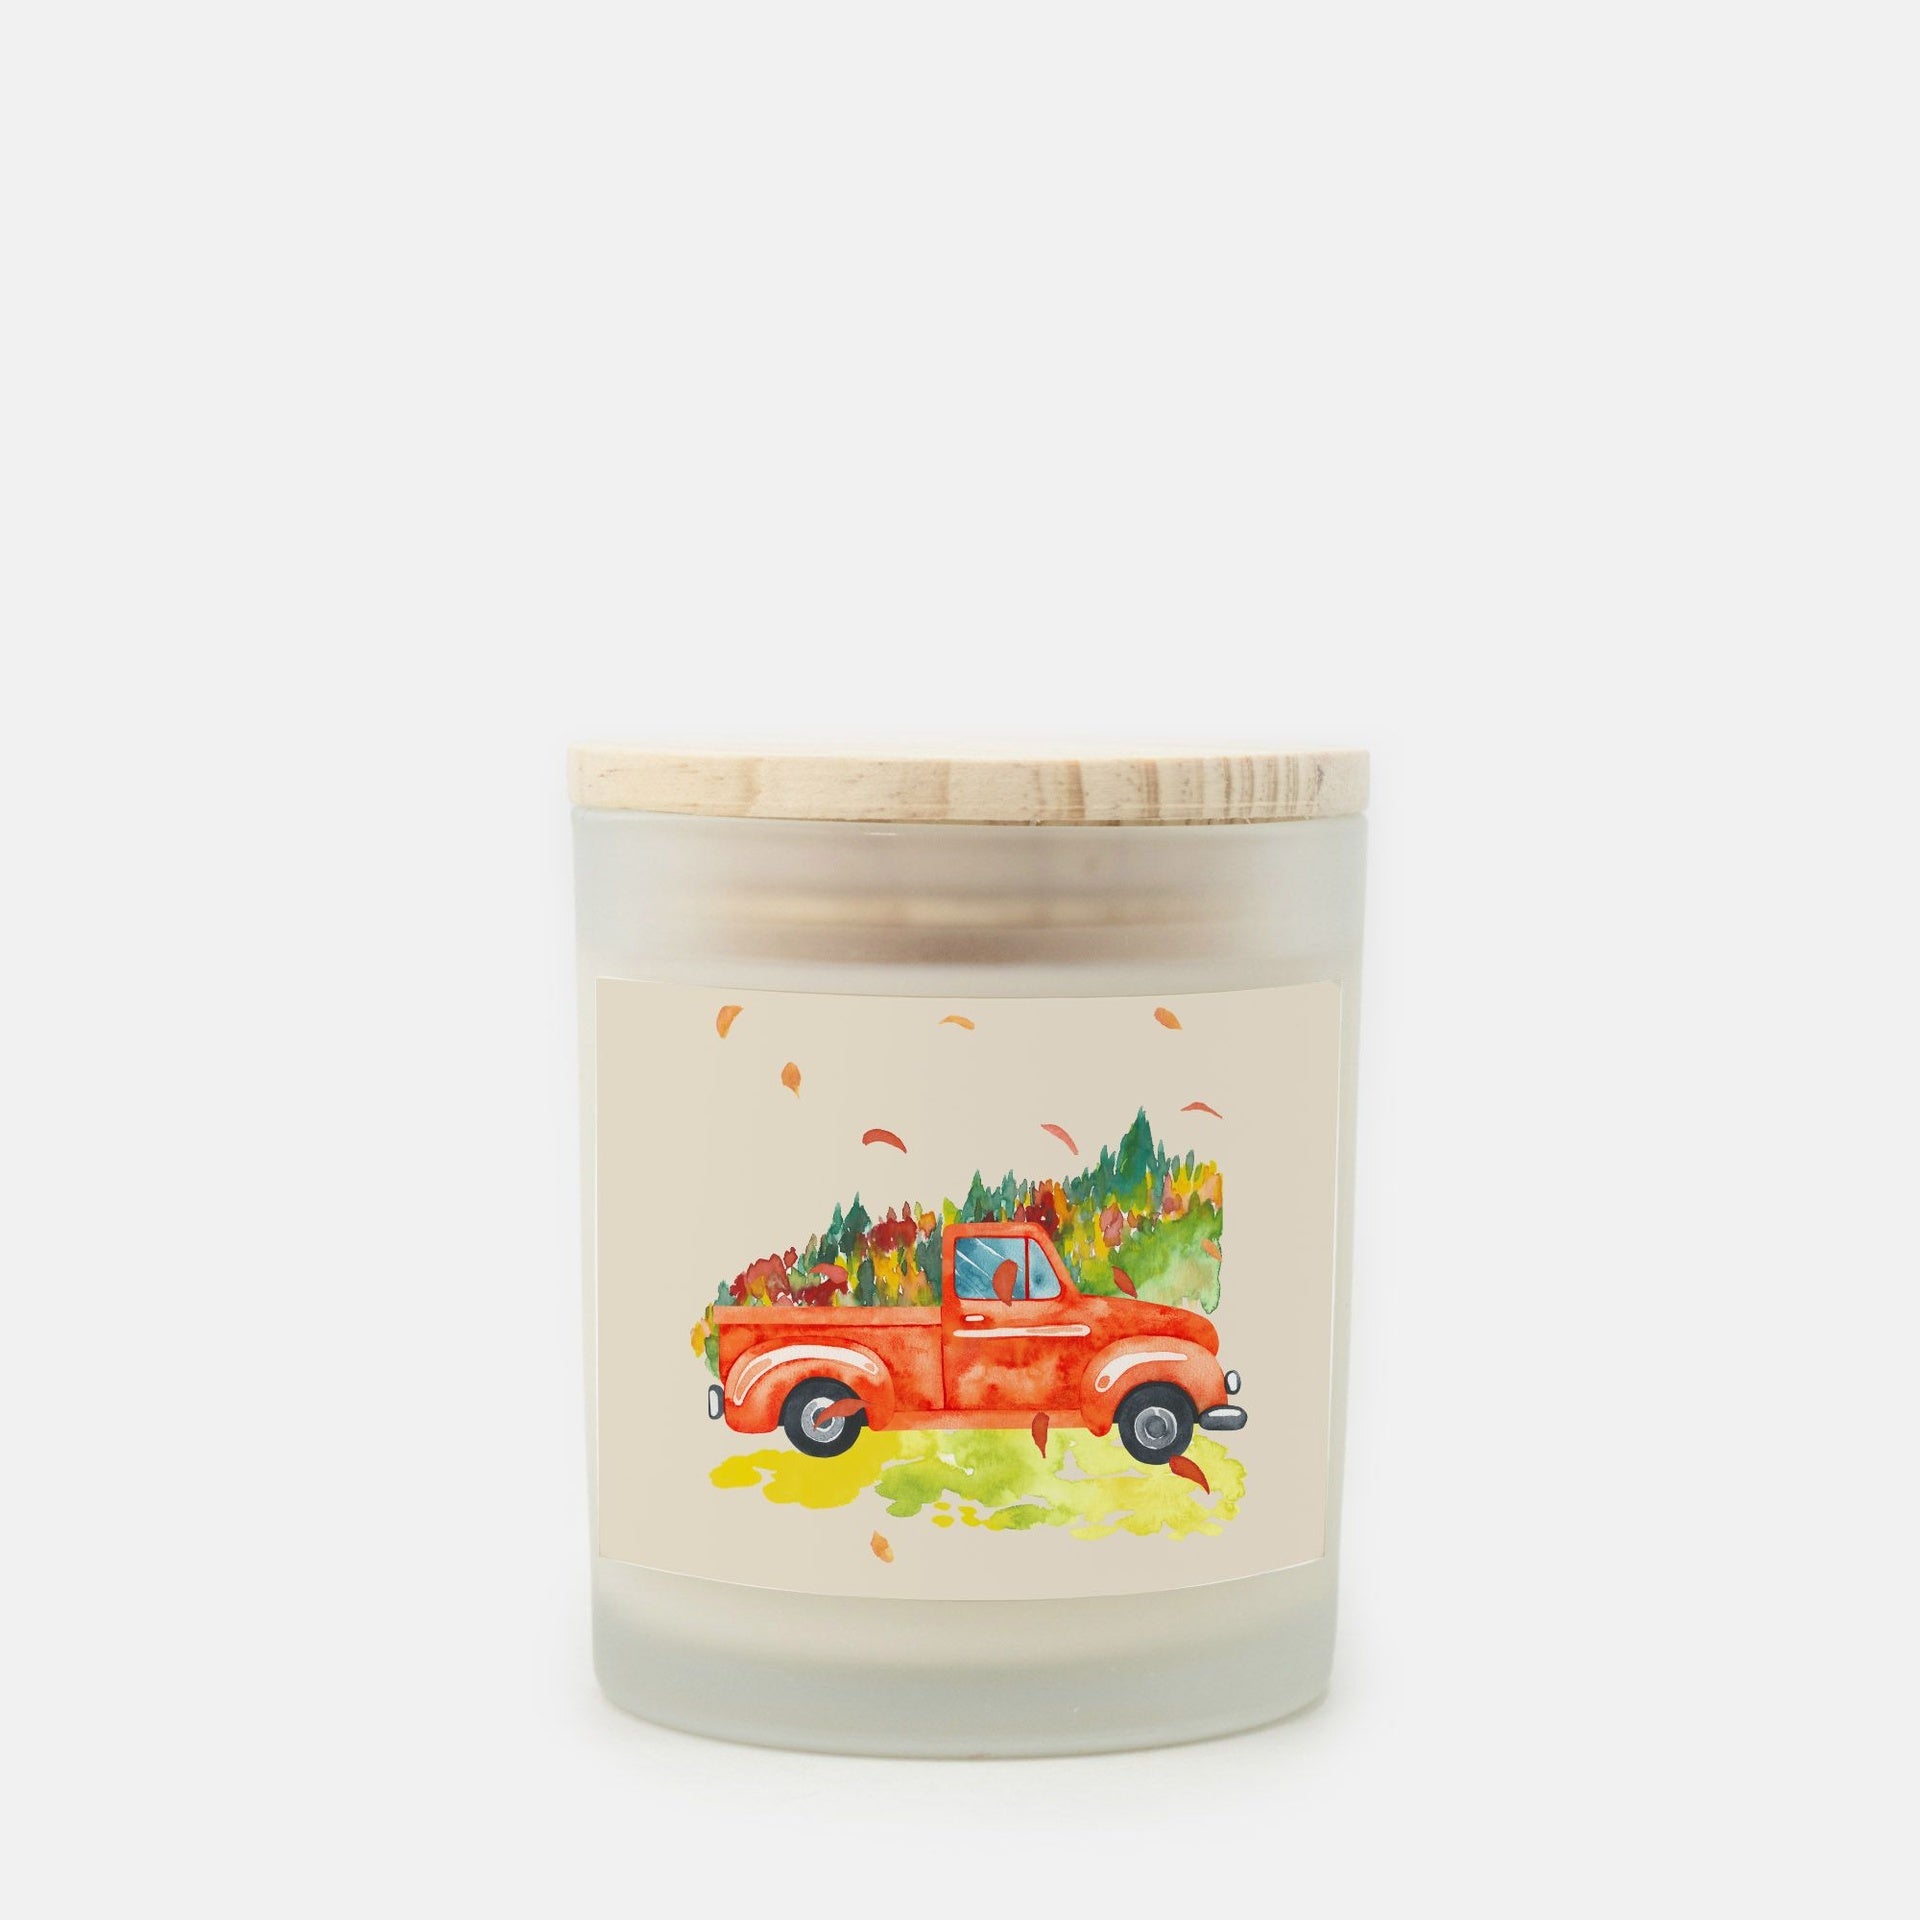 Lifestyle Details - 11oz Orange Rustic Truck & Leaves Frosted Glass Candle - Cashmere Vanilla